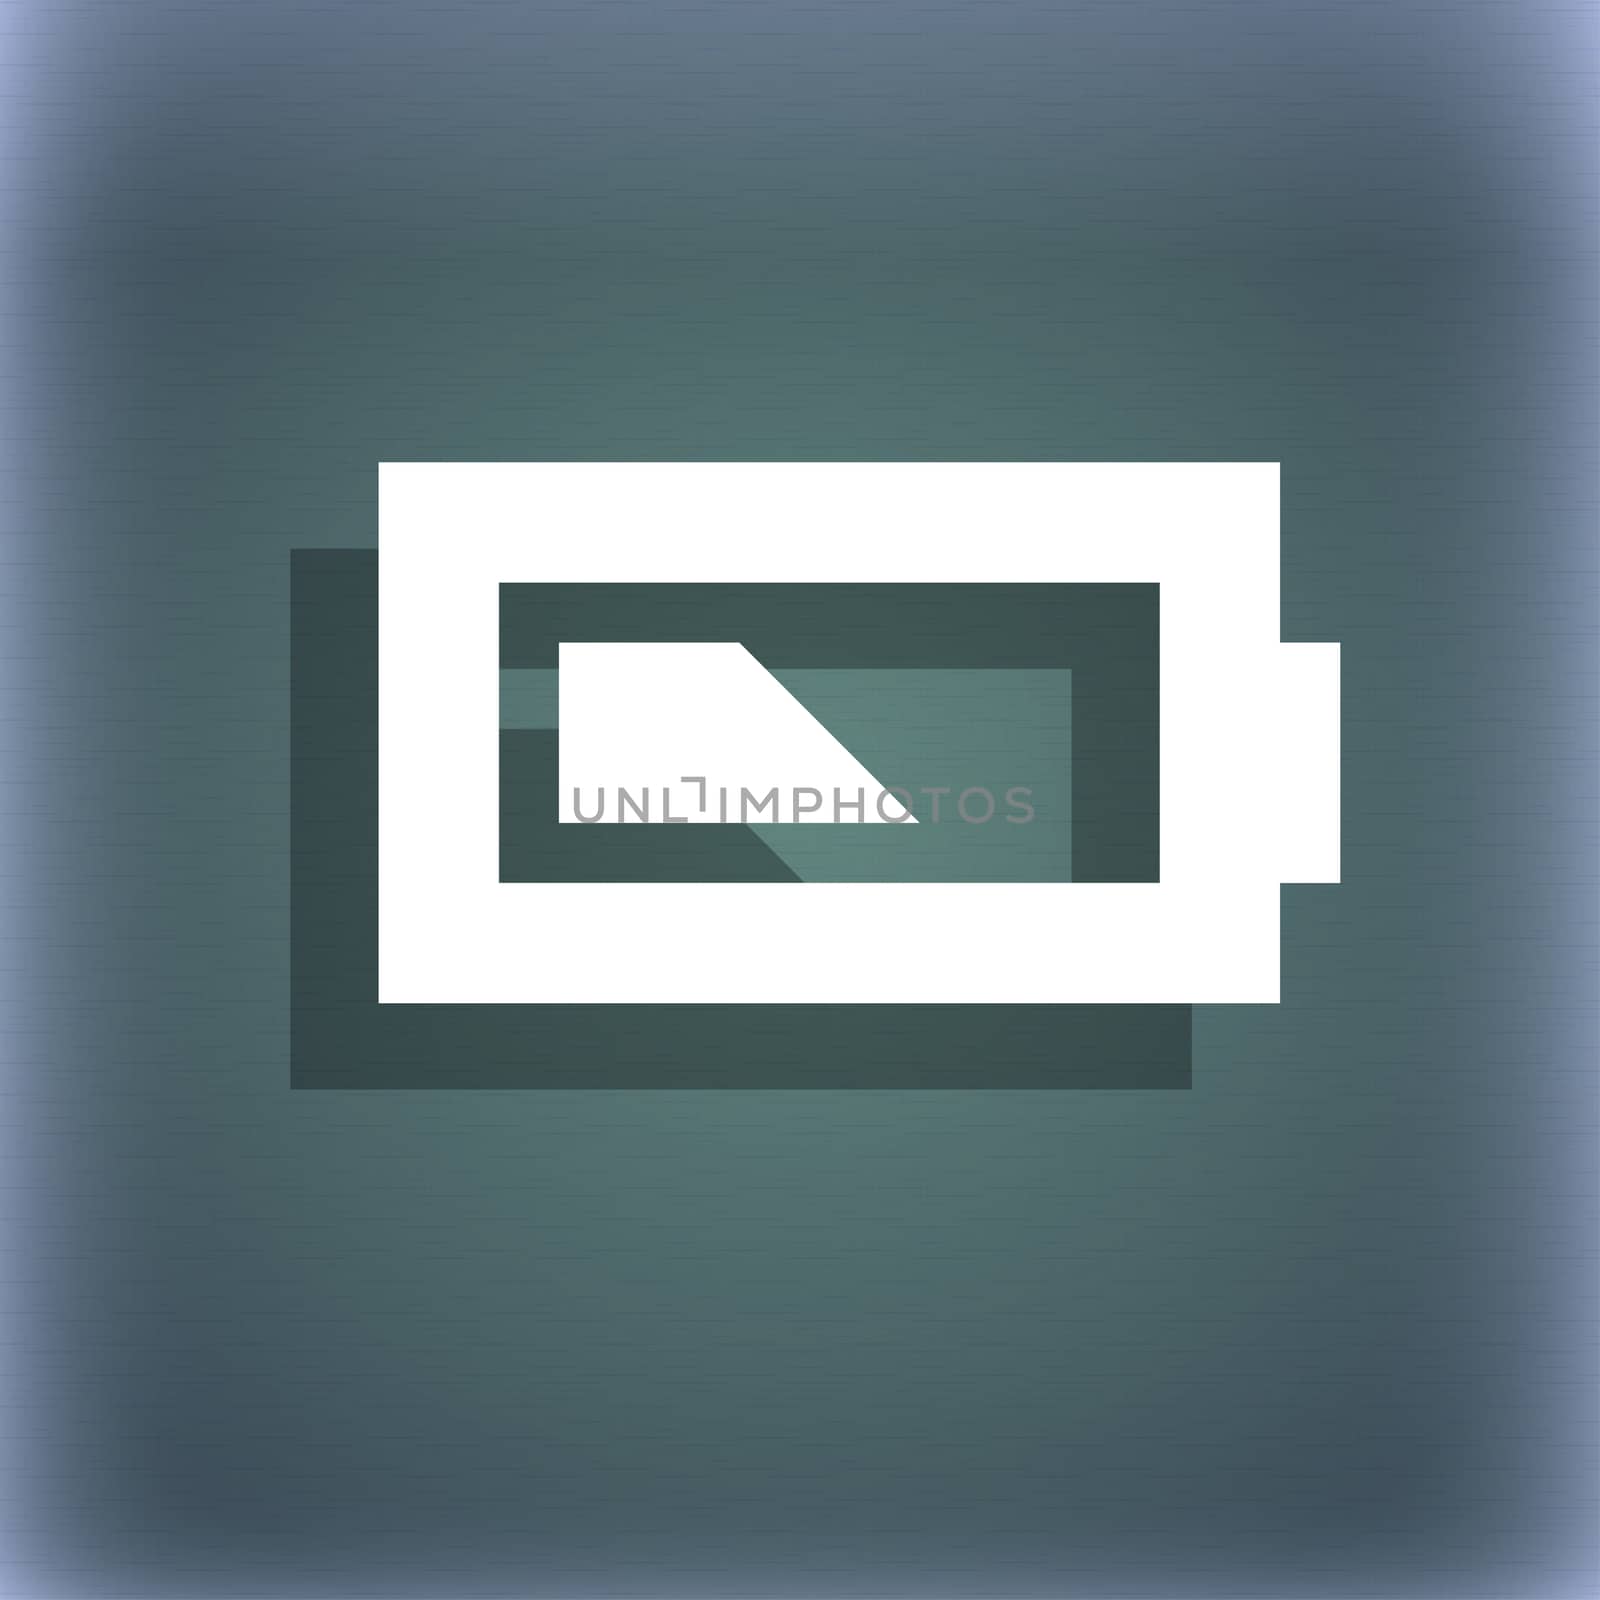 Battery half level icon symbol on the blue-green abstract background with shadow and space for your text. illustration